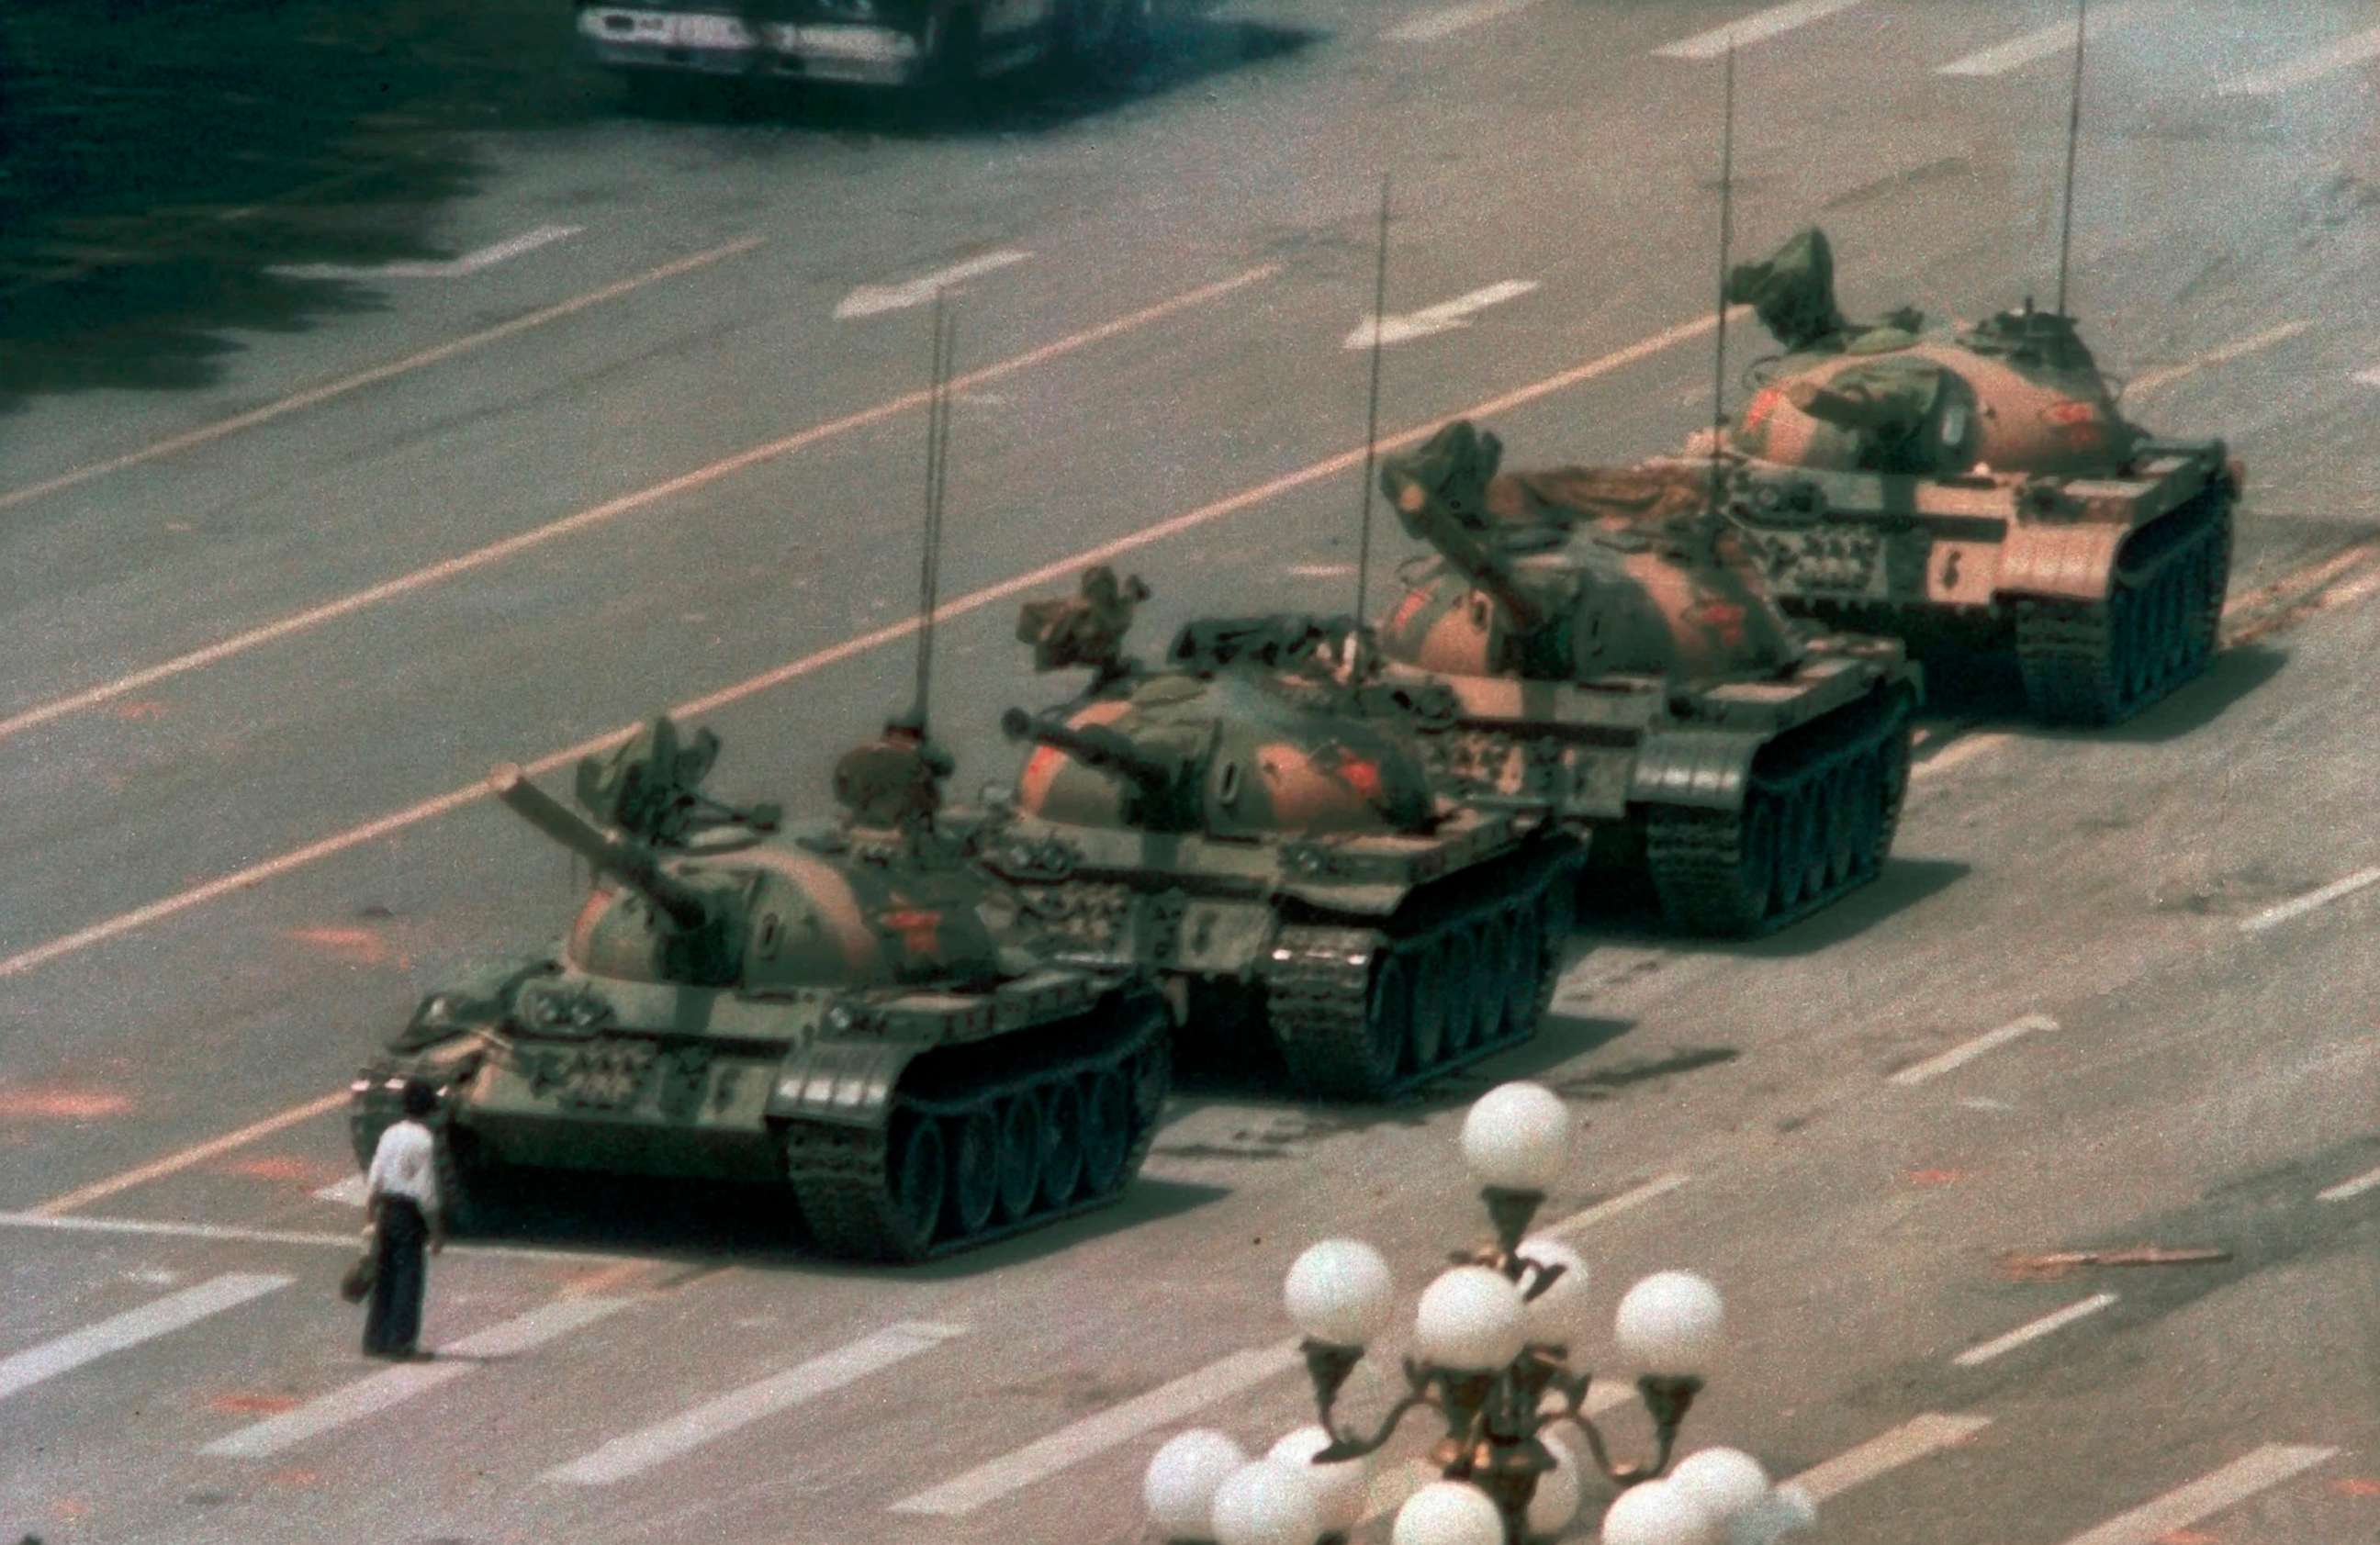 PHOTO: A man stands alone to block a line of tanks heading east on Beijing's Changan Blvd. in Tiananmen Square, June 5, 1989.